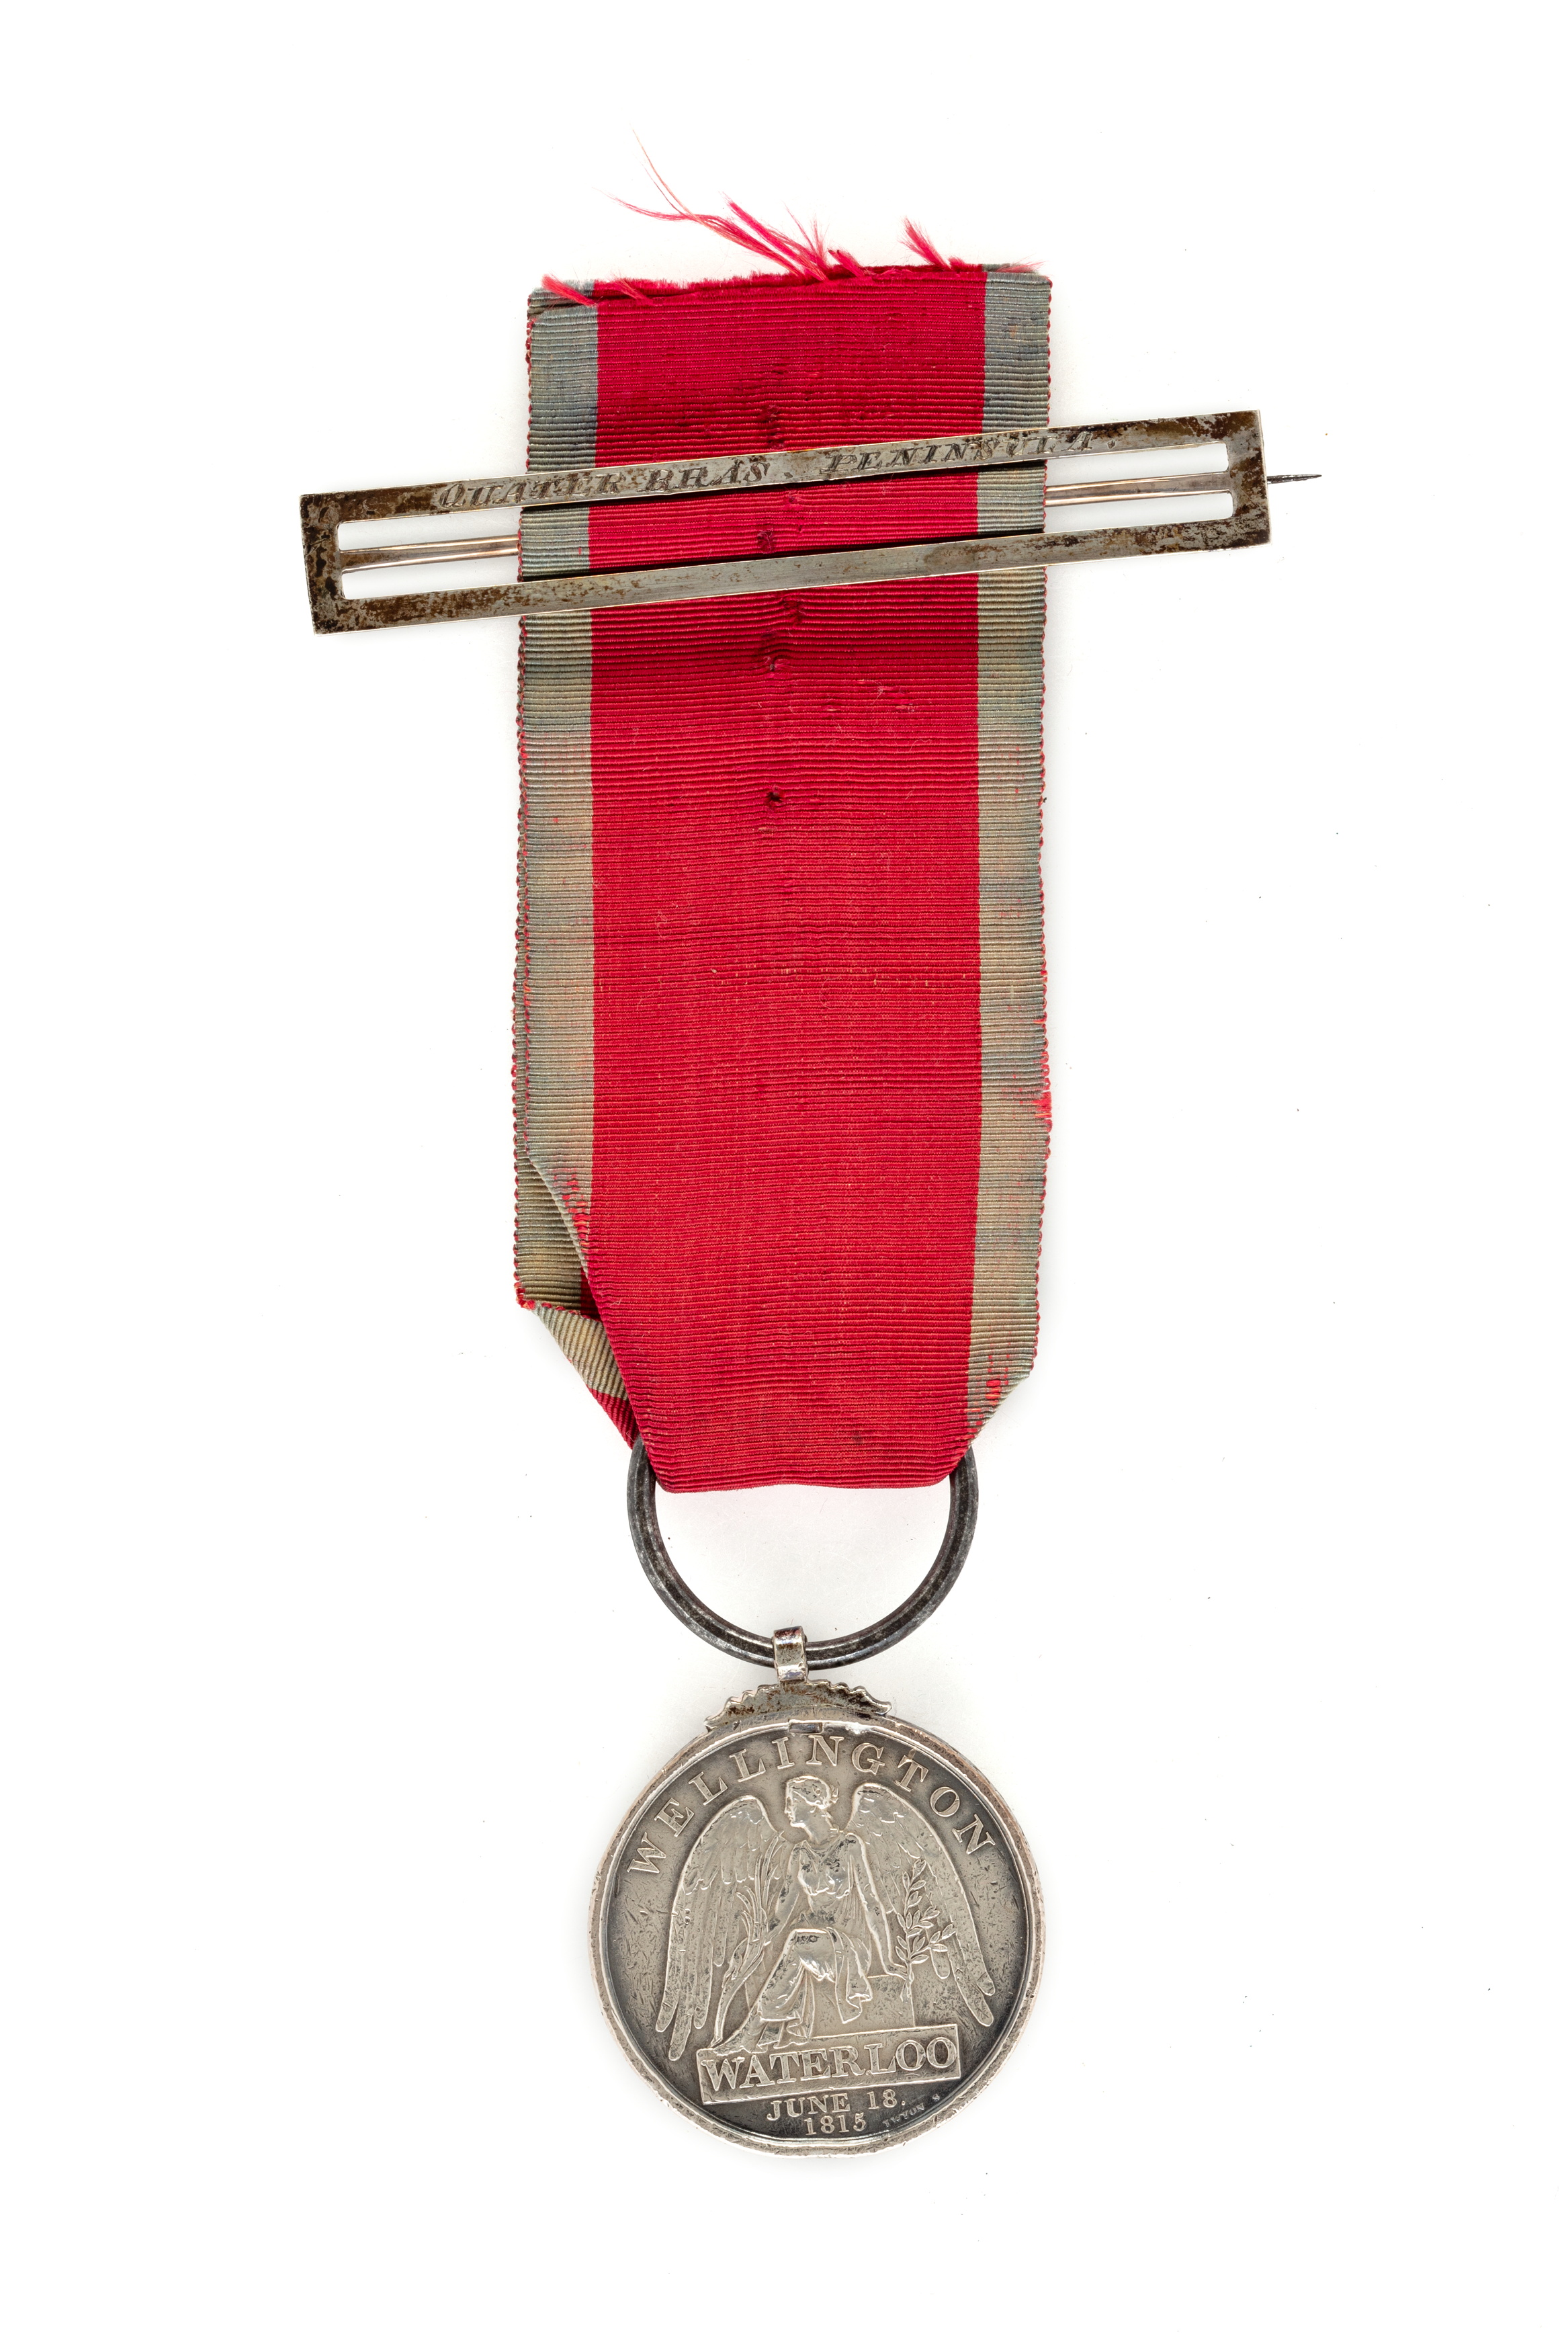 British war medal from Waterloo awarded to Captain J H Crummer